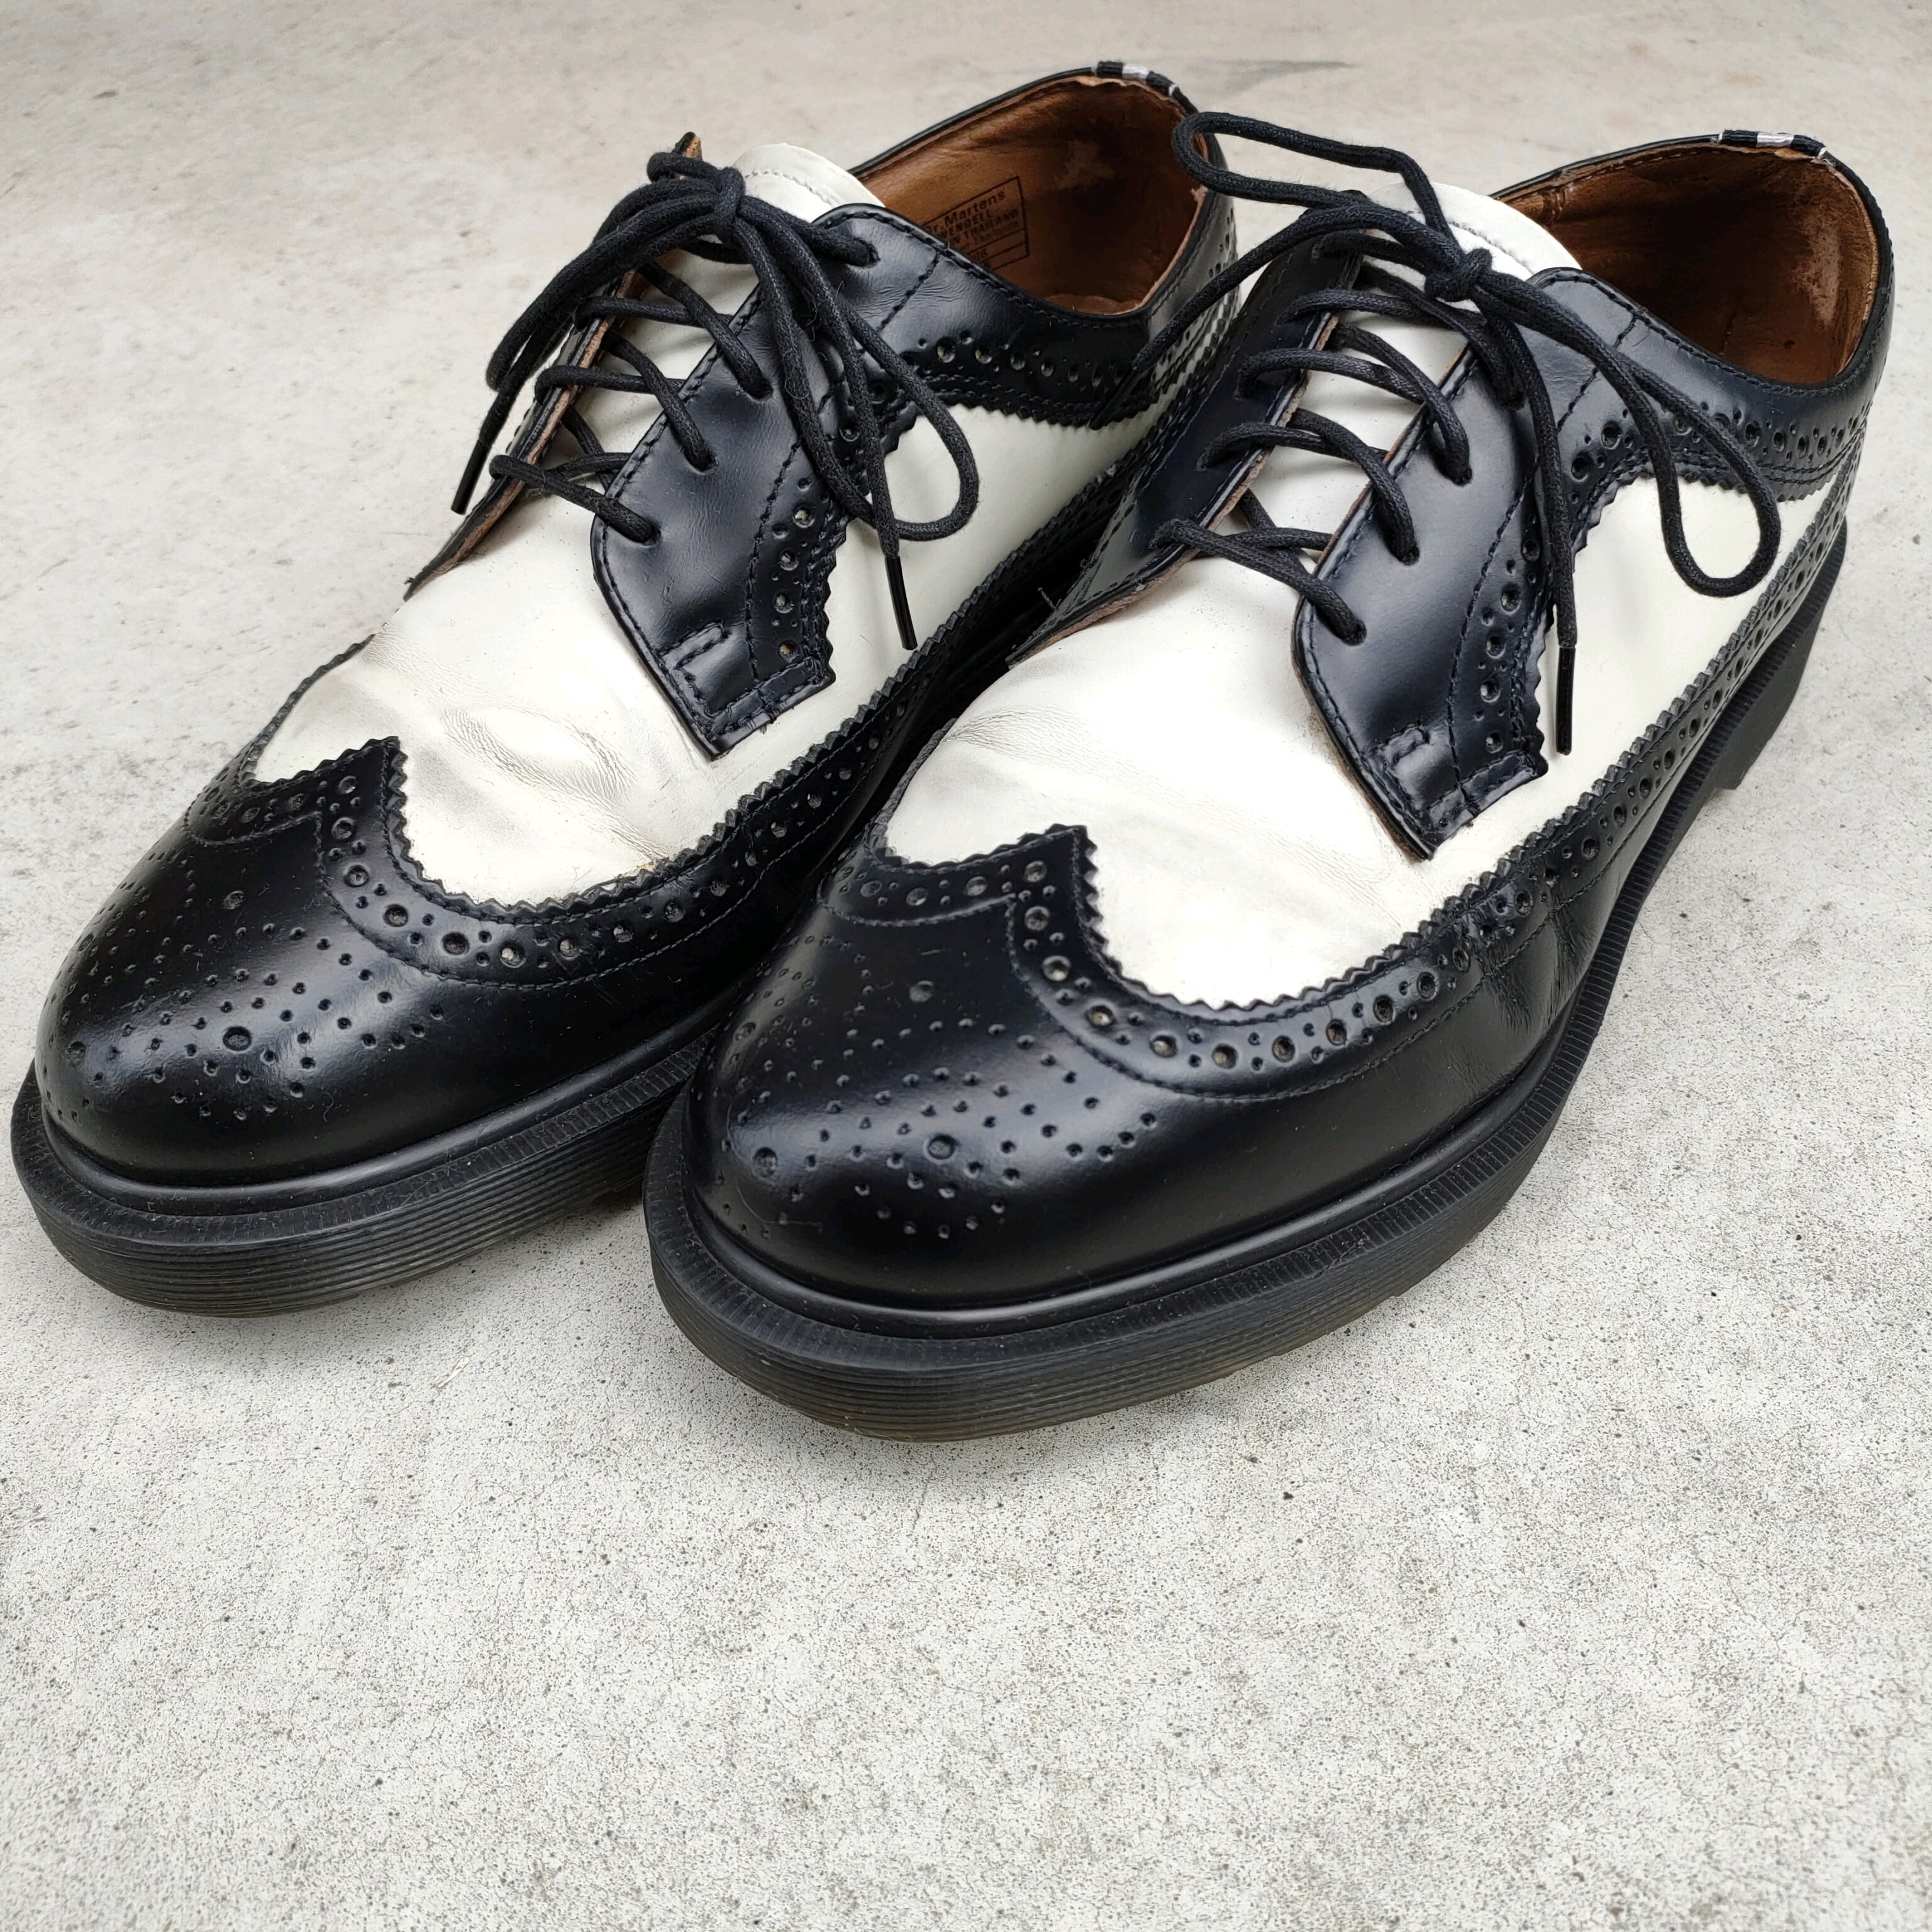 FRED PERRY ダービーシューズ 43 28cm 美品